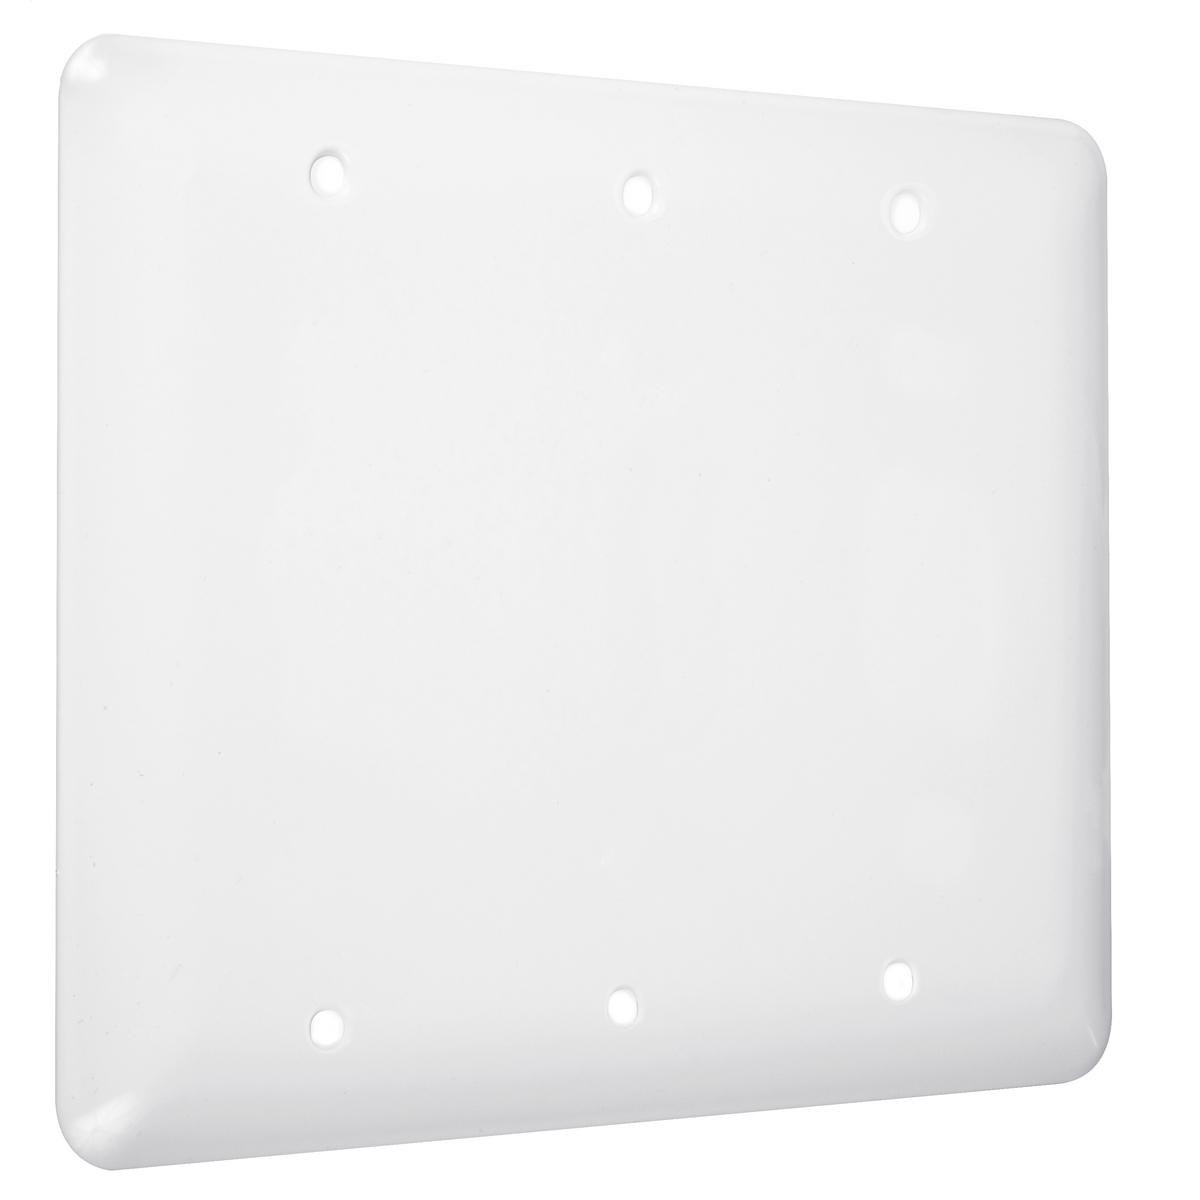 Hubbell WRW-BBB 3-Gang Metal Wallplate, Maxi, 3-Blank, White Smooth  ; Easily primed and painted to match or complement walls. ; Won't bow, crack or distort during installation. ; Premium North American powder coat. ; Includes screw(s) in matching finish.